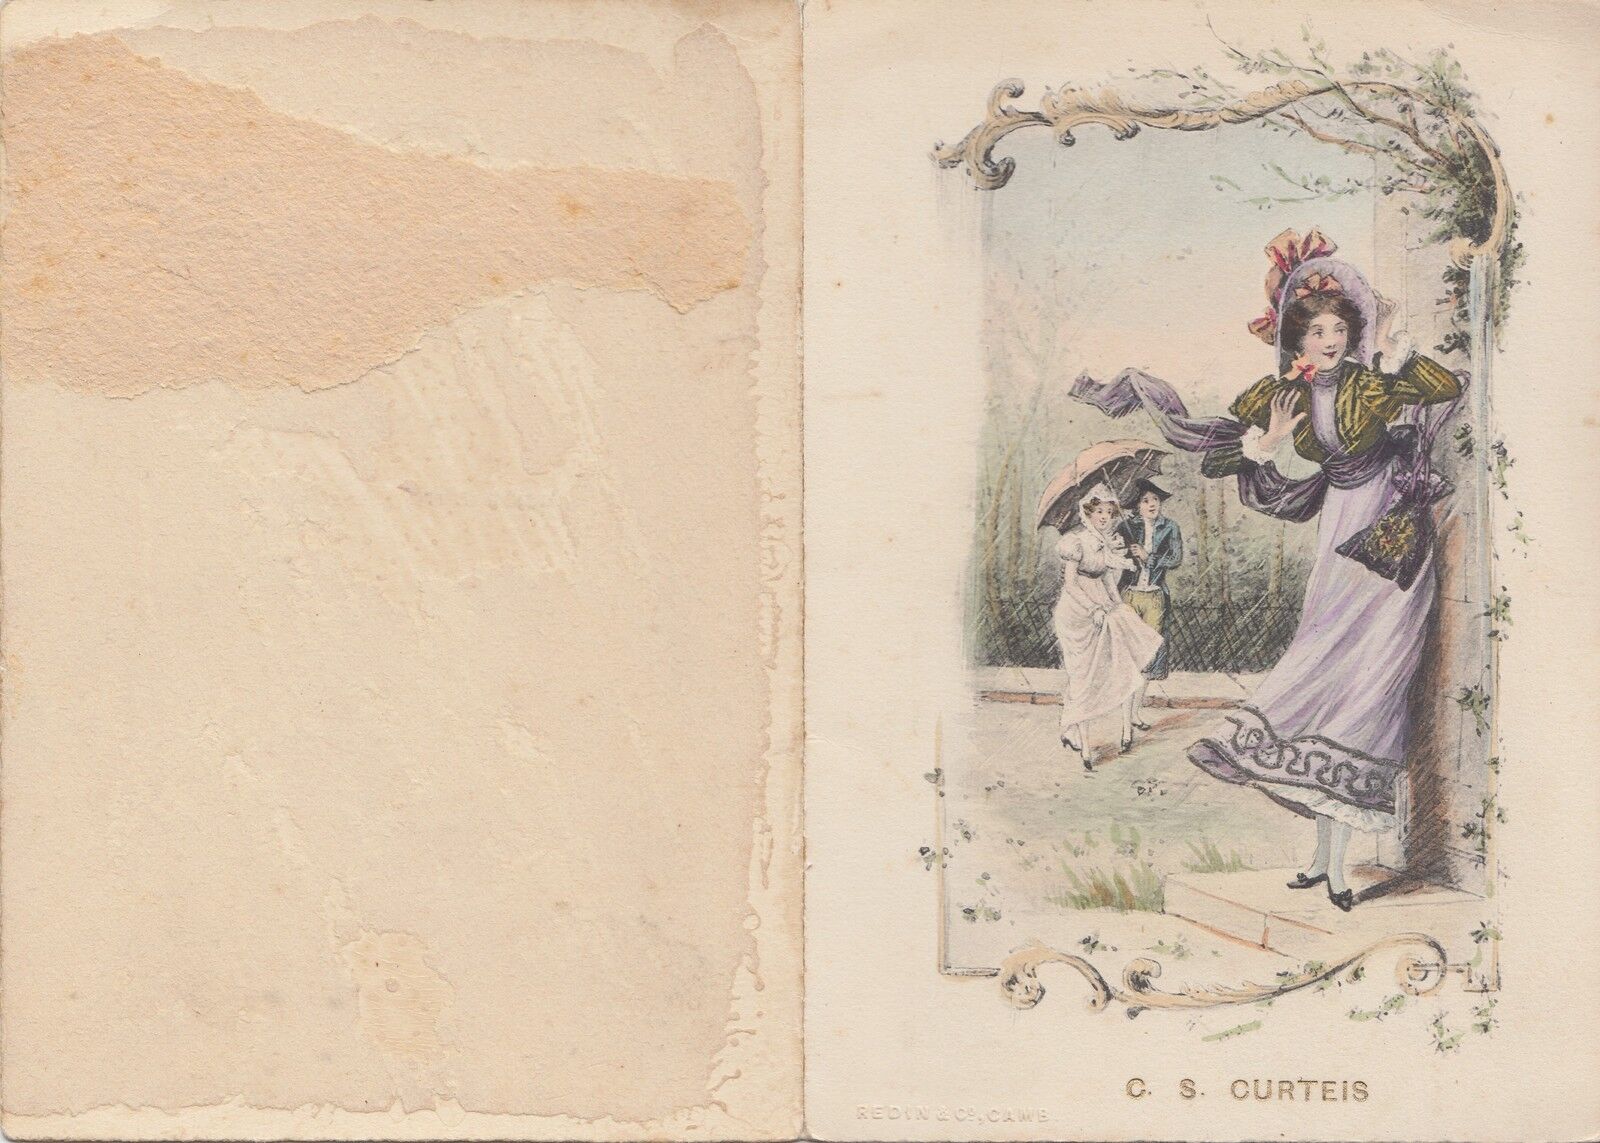 1899 menu showing glamorous lady for C S Curteis